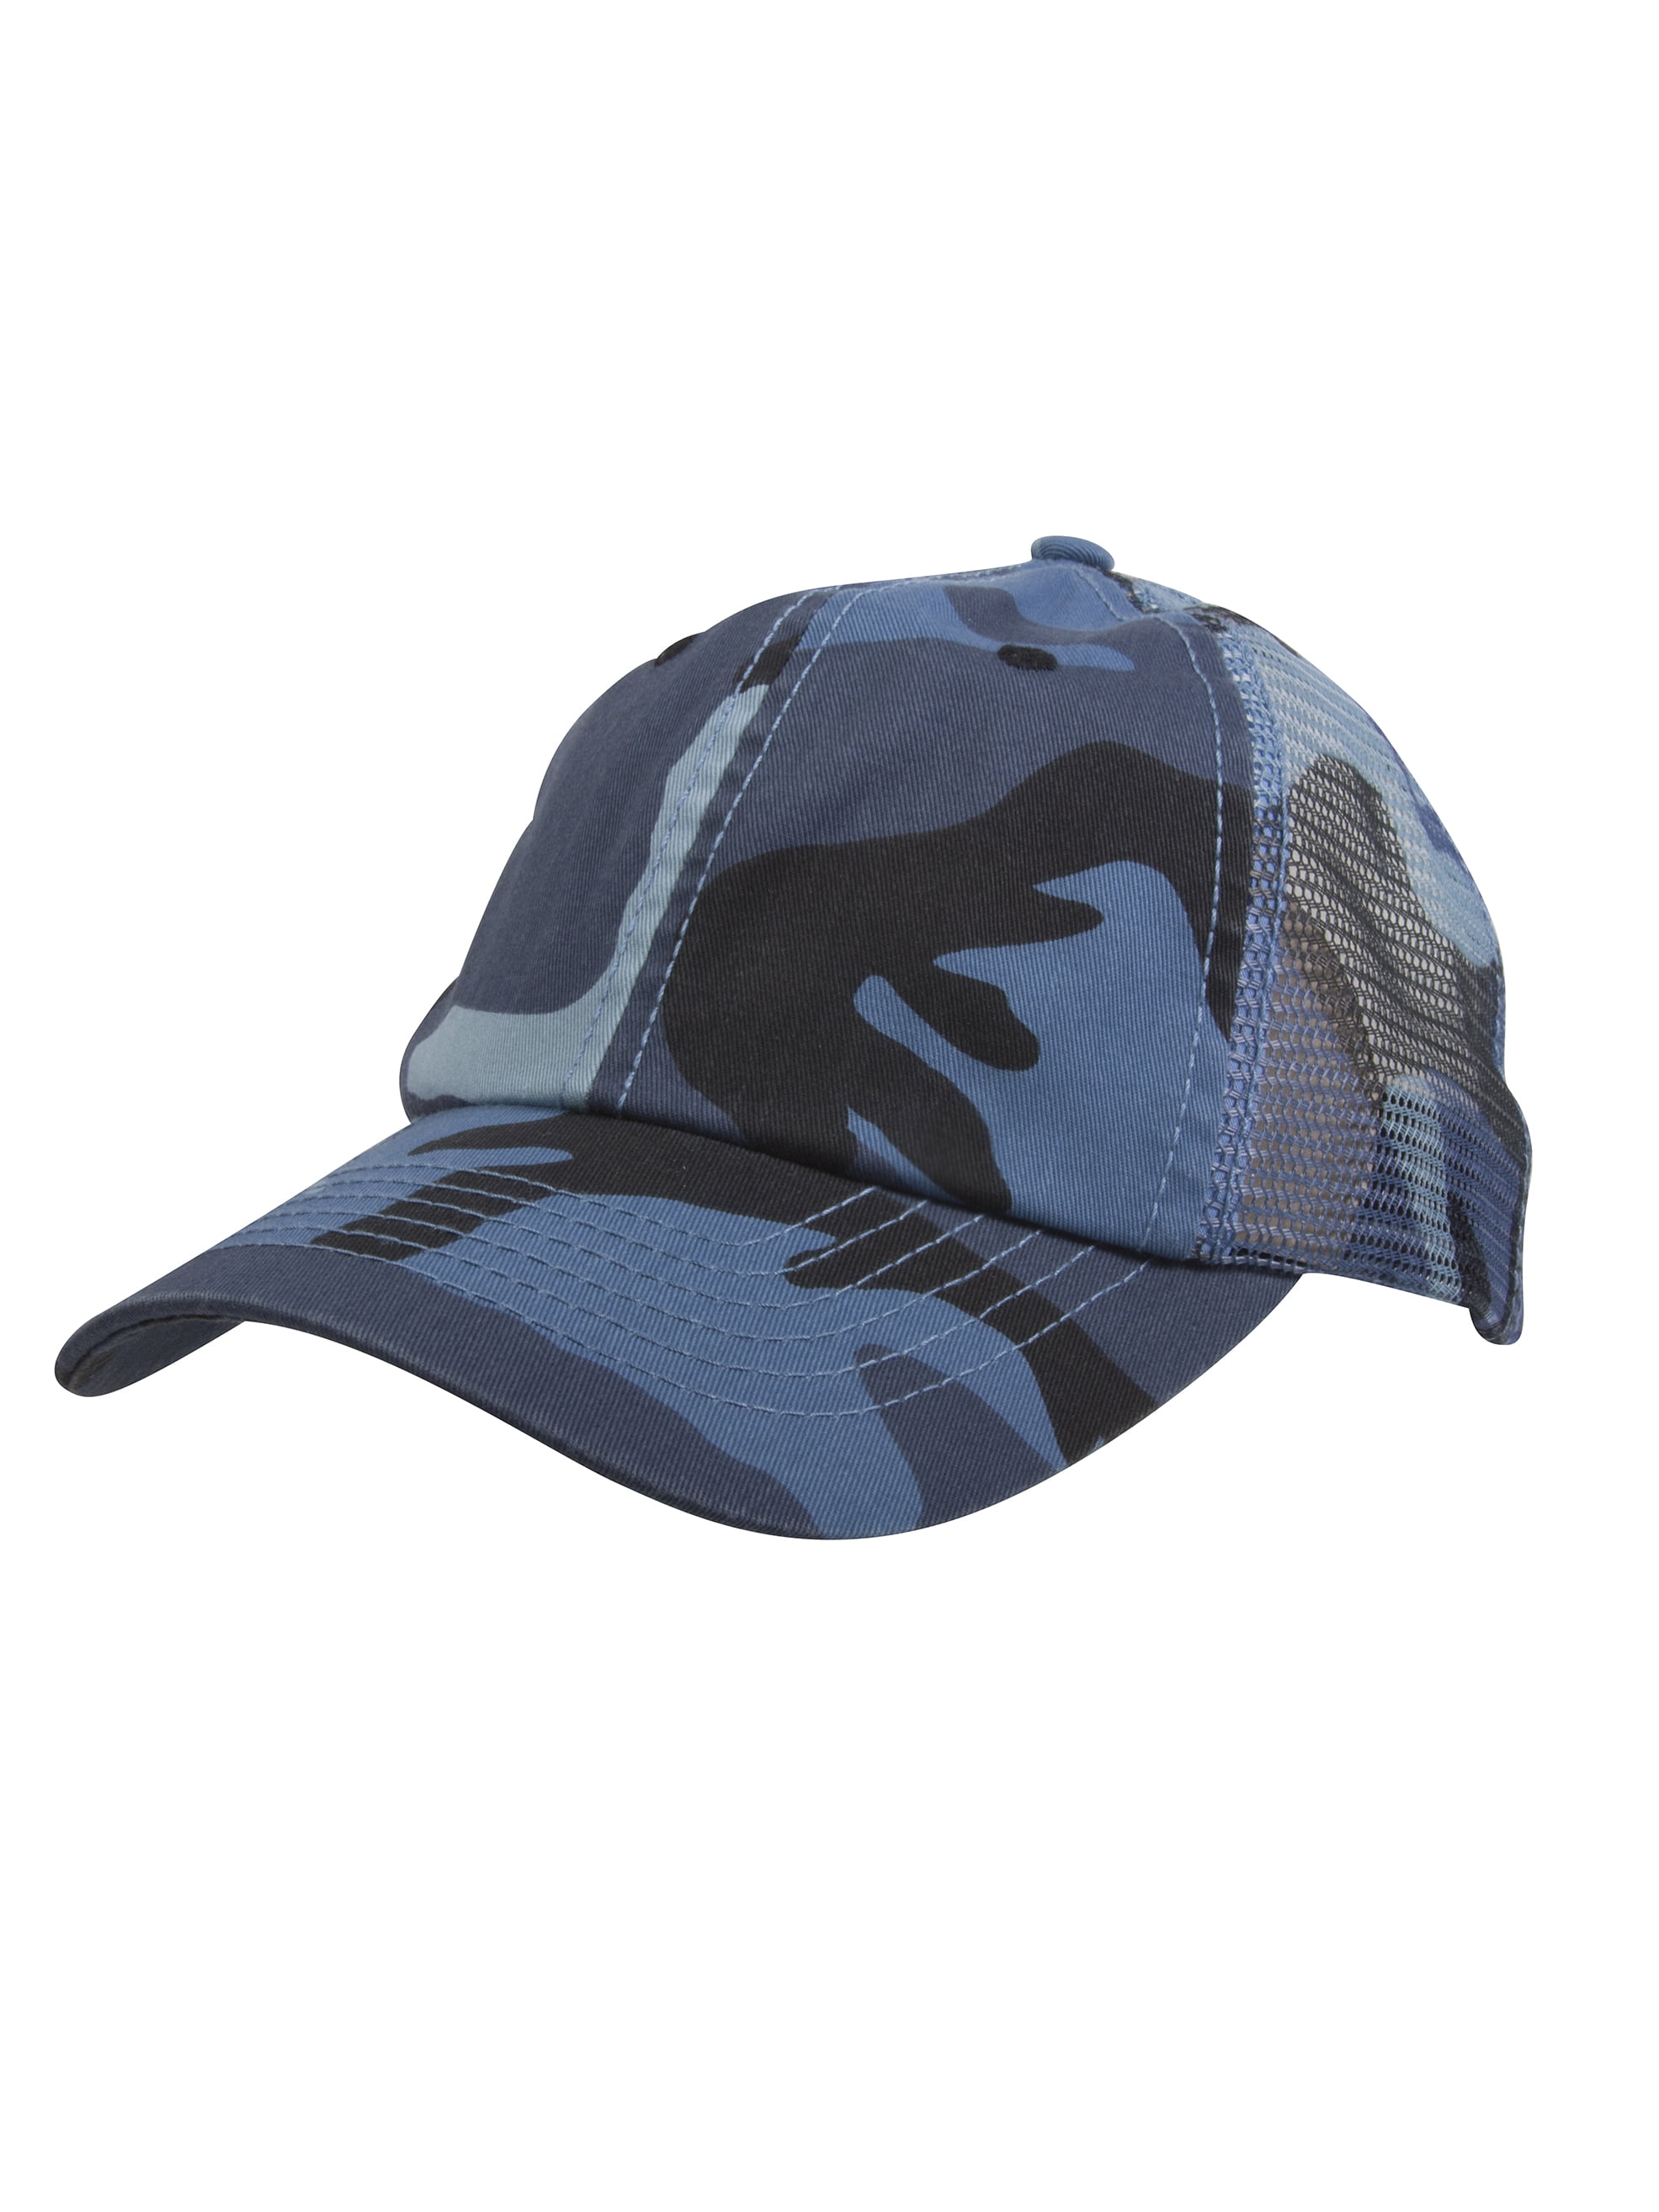 G Men's Enzyme Washed Camouflage Trucker Mesh Cap 